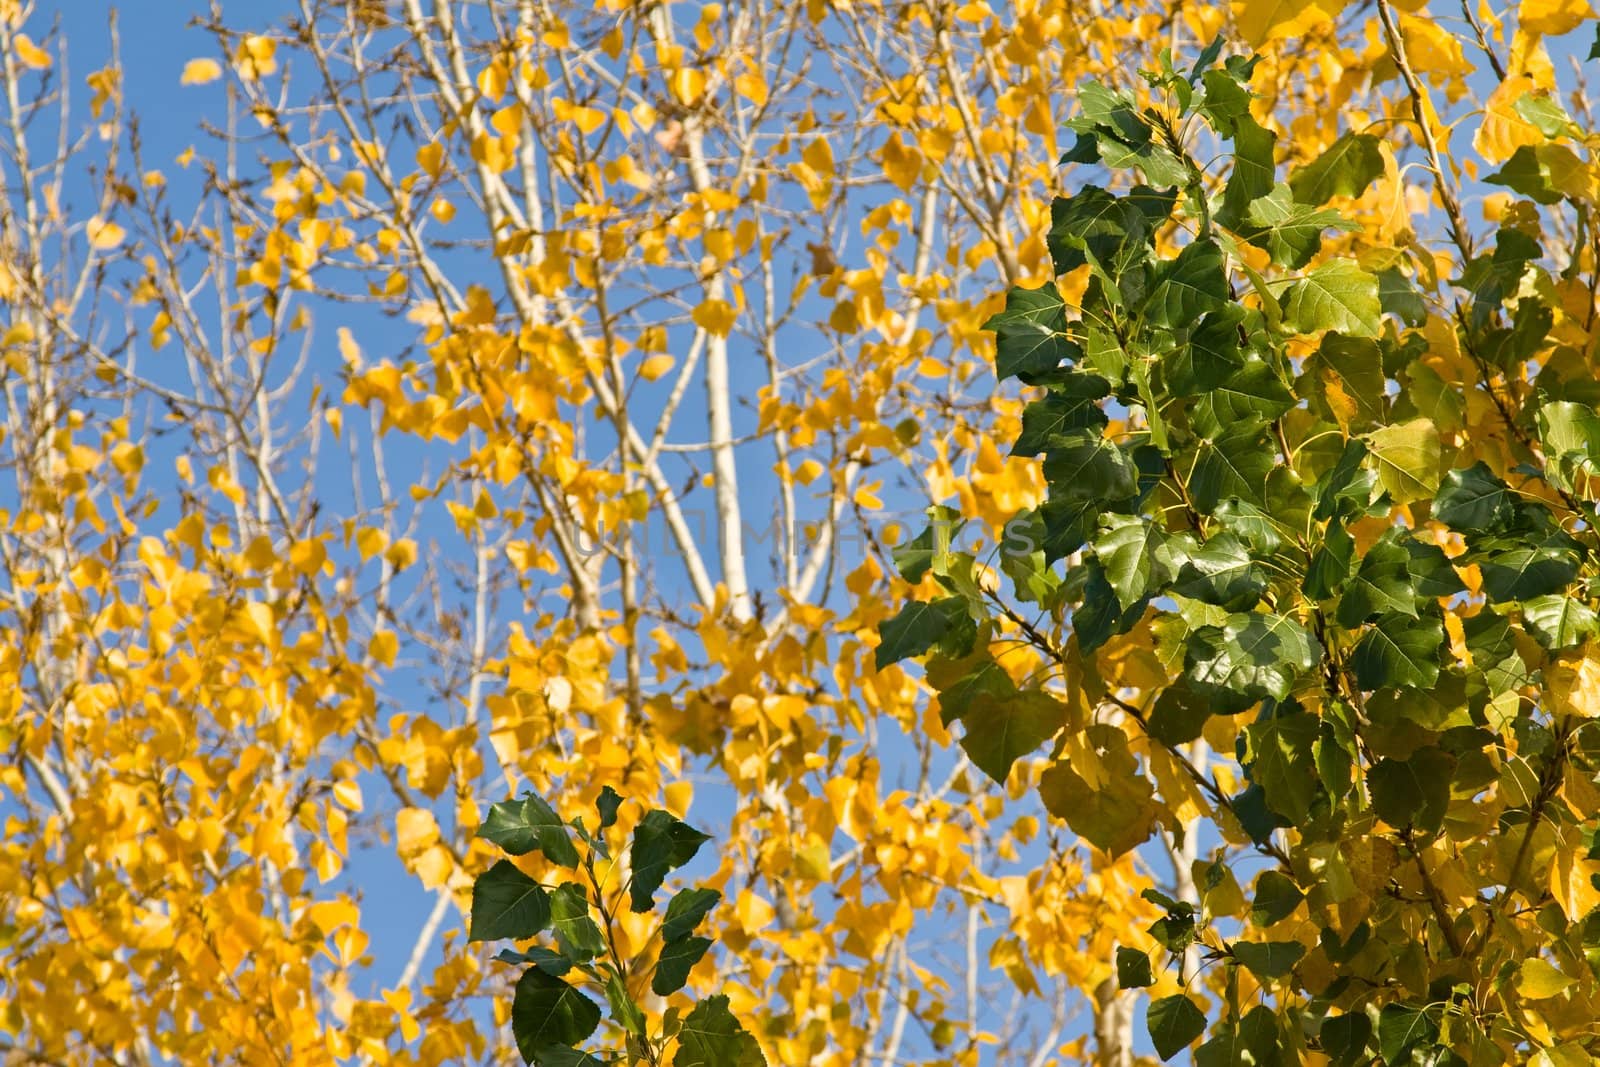 Close-up of tree branches with different autumn leaves as they change color